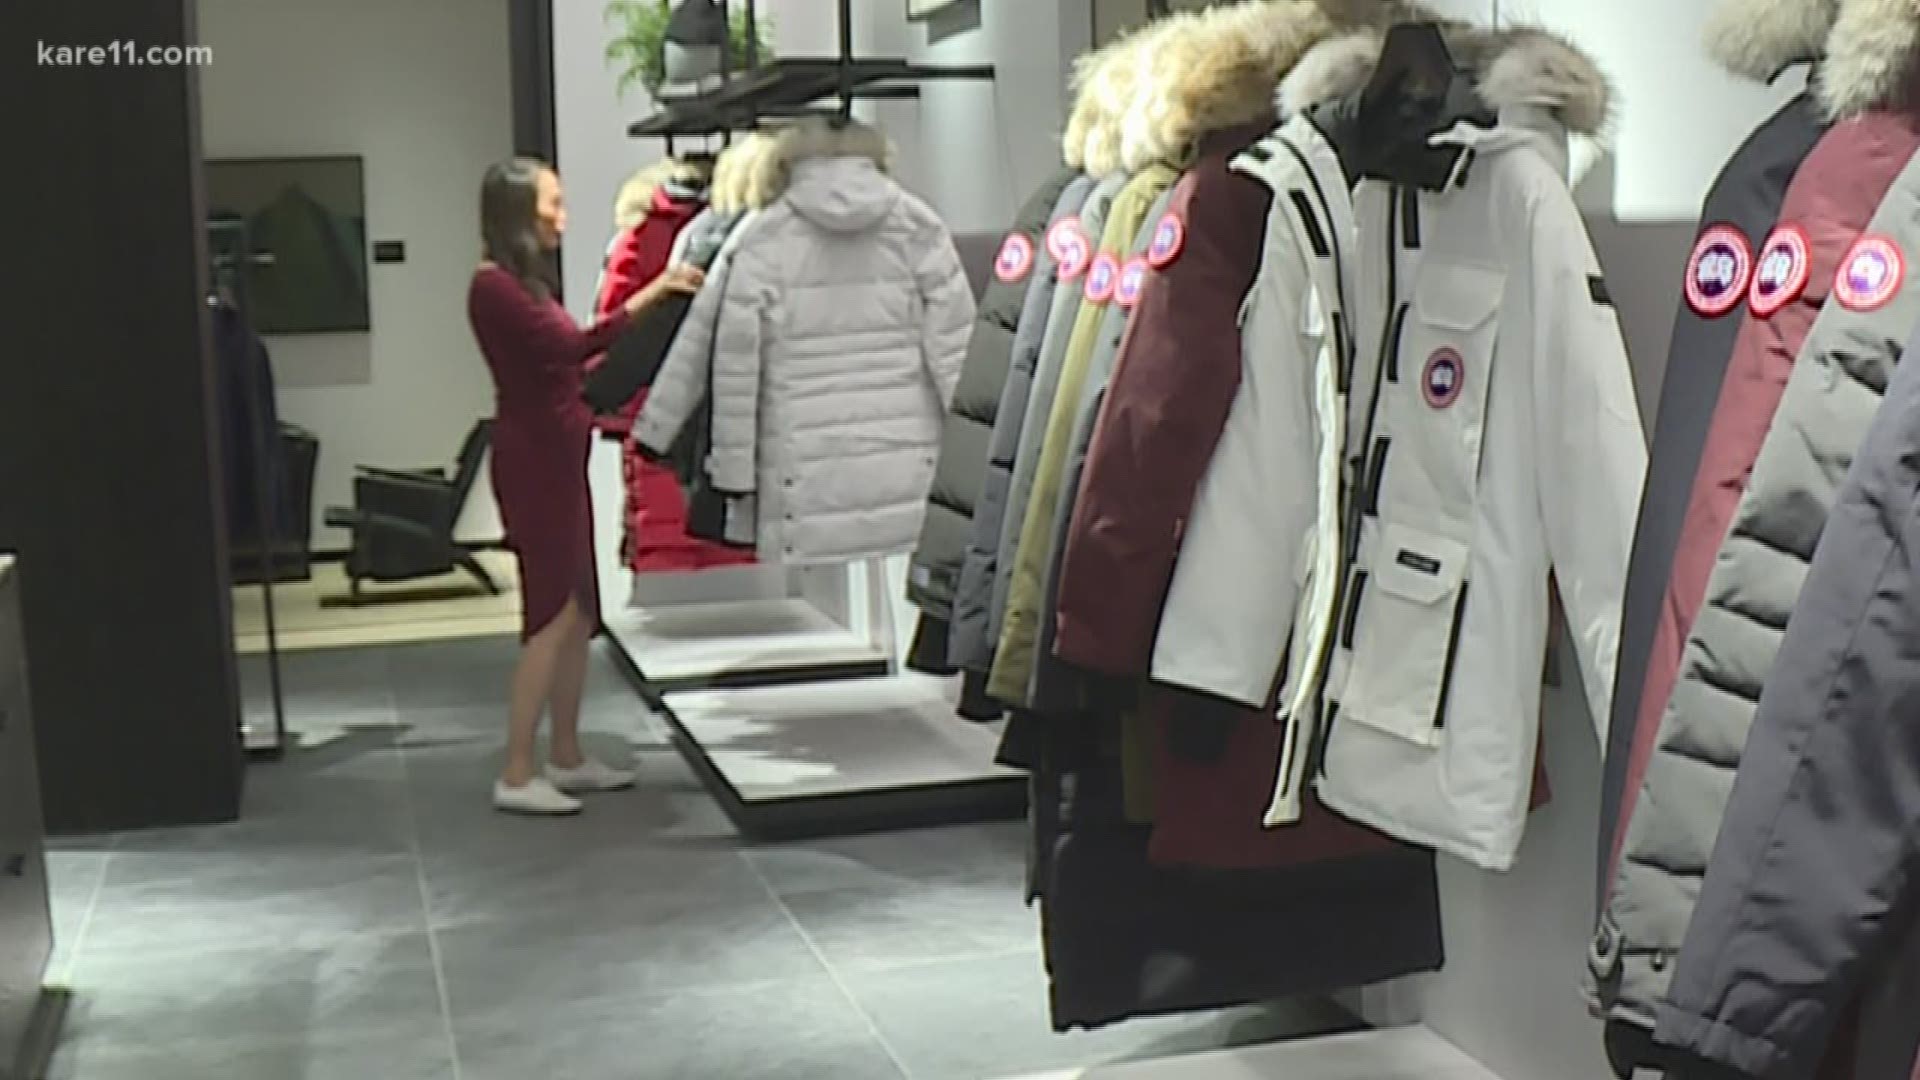 Canada Goose's New Store At Short Hills Mall To Have 'Cold Room